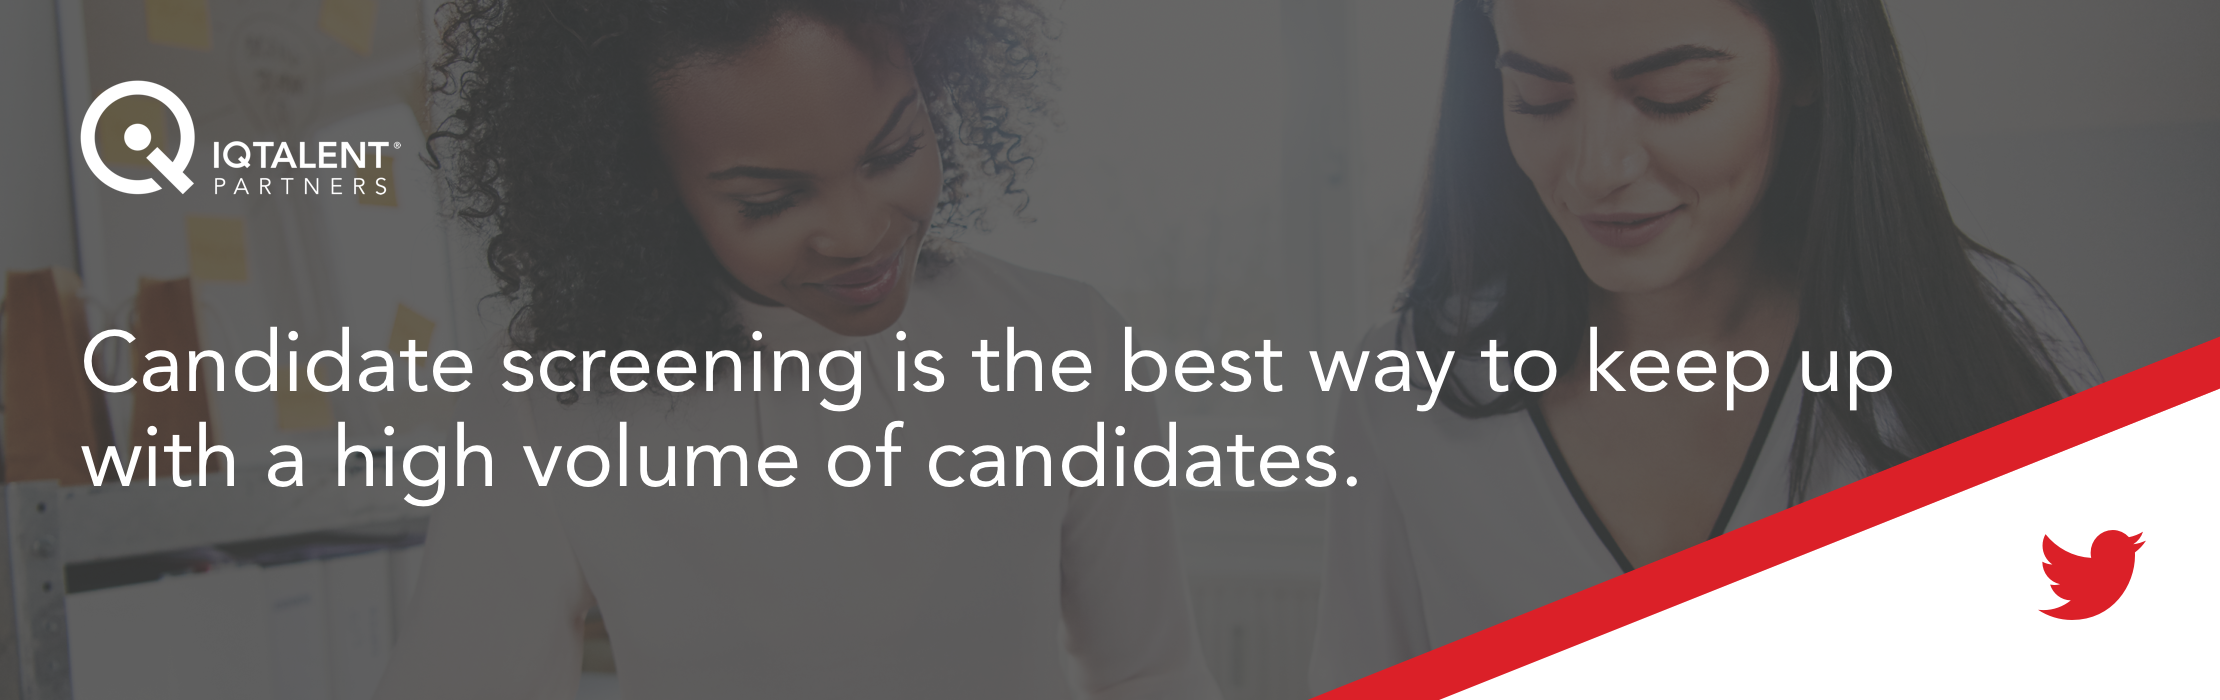 Candidate screening is the best way to keep up with a high volume of candidates. 